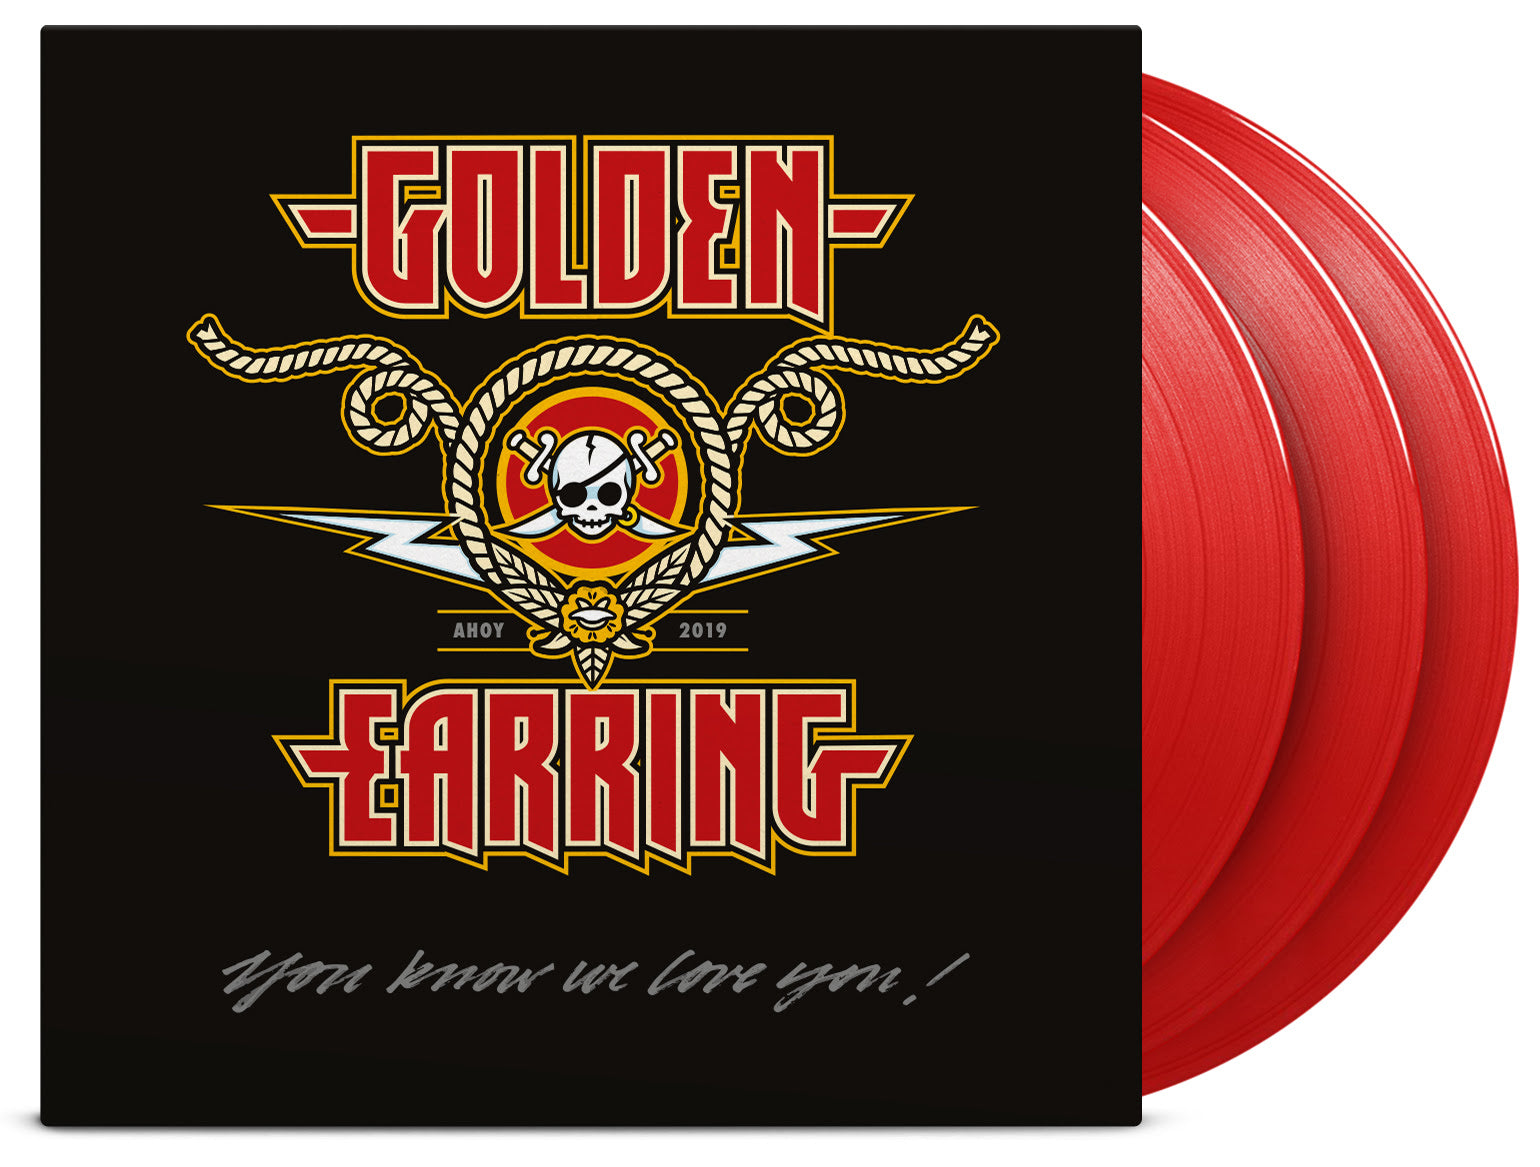 Golden Earring - You Know We Love You! (3 LPs)